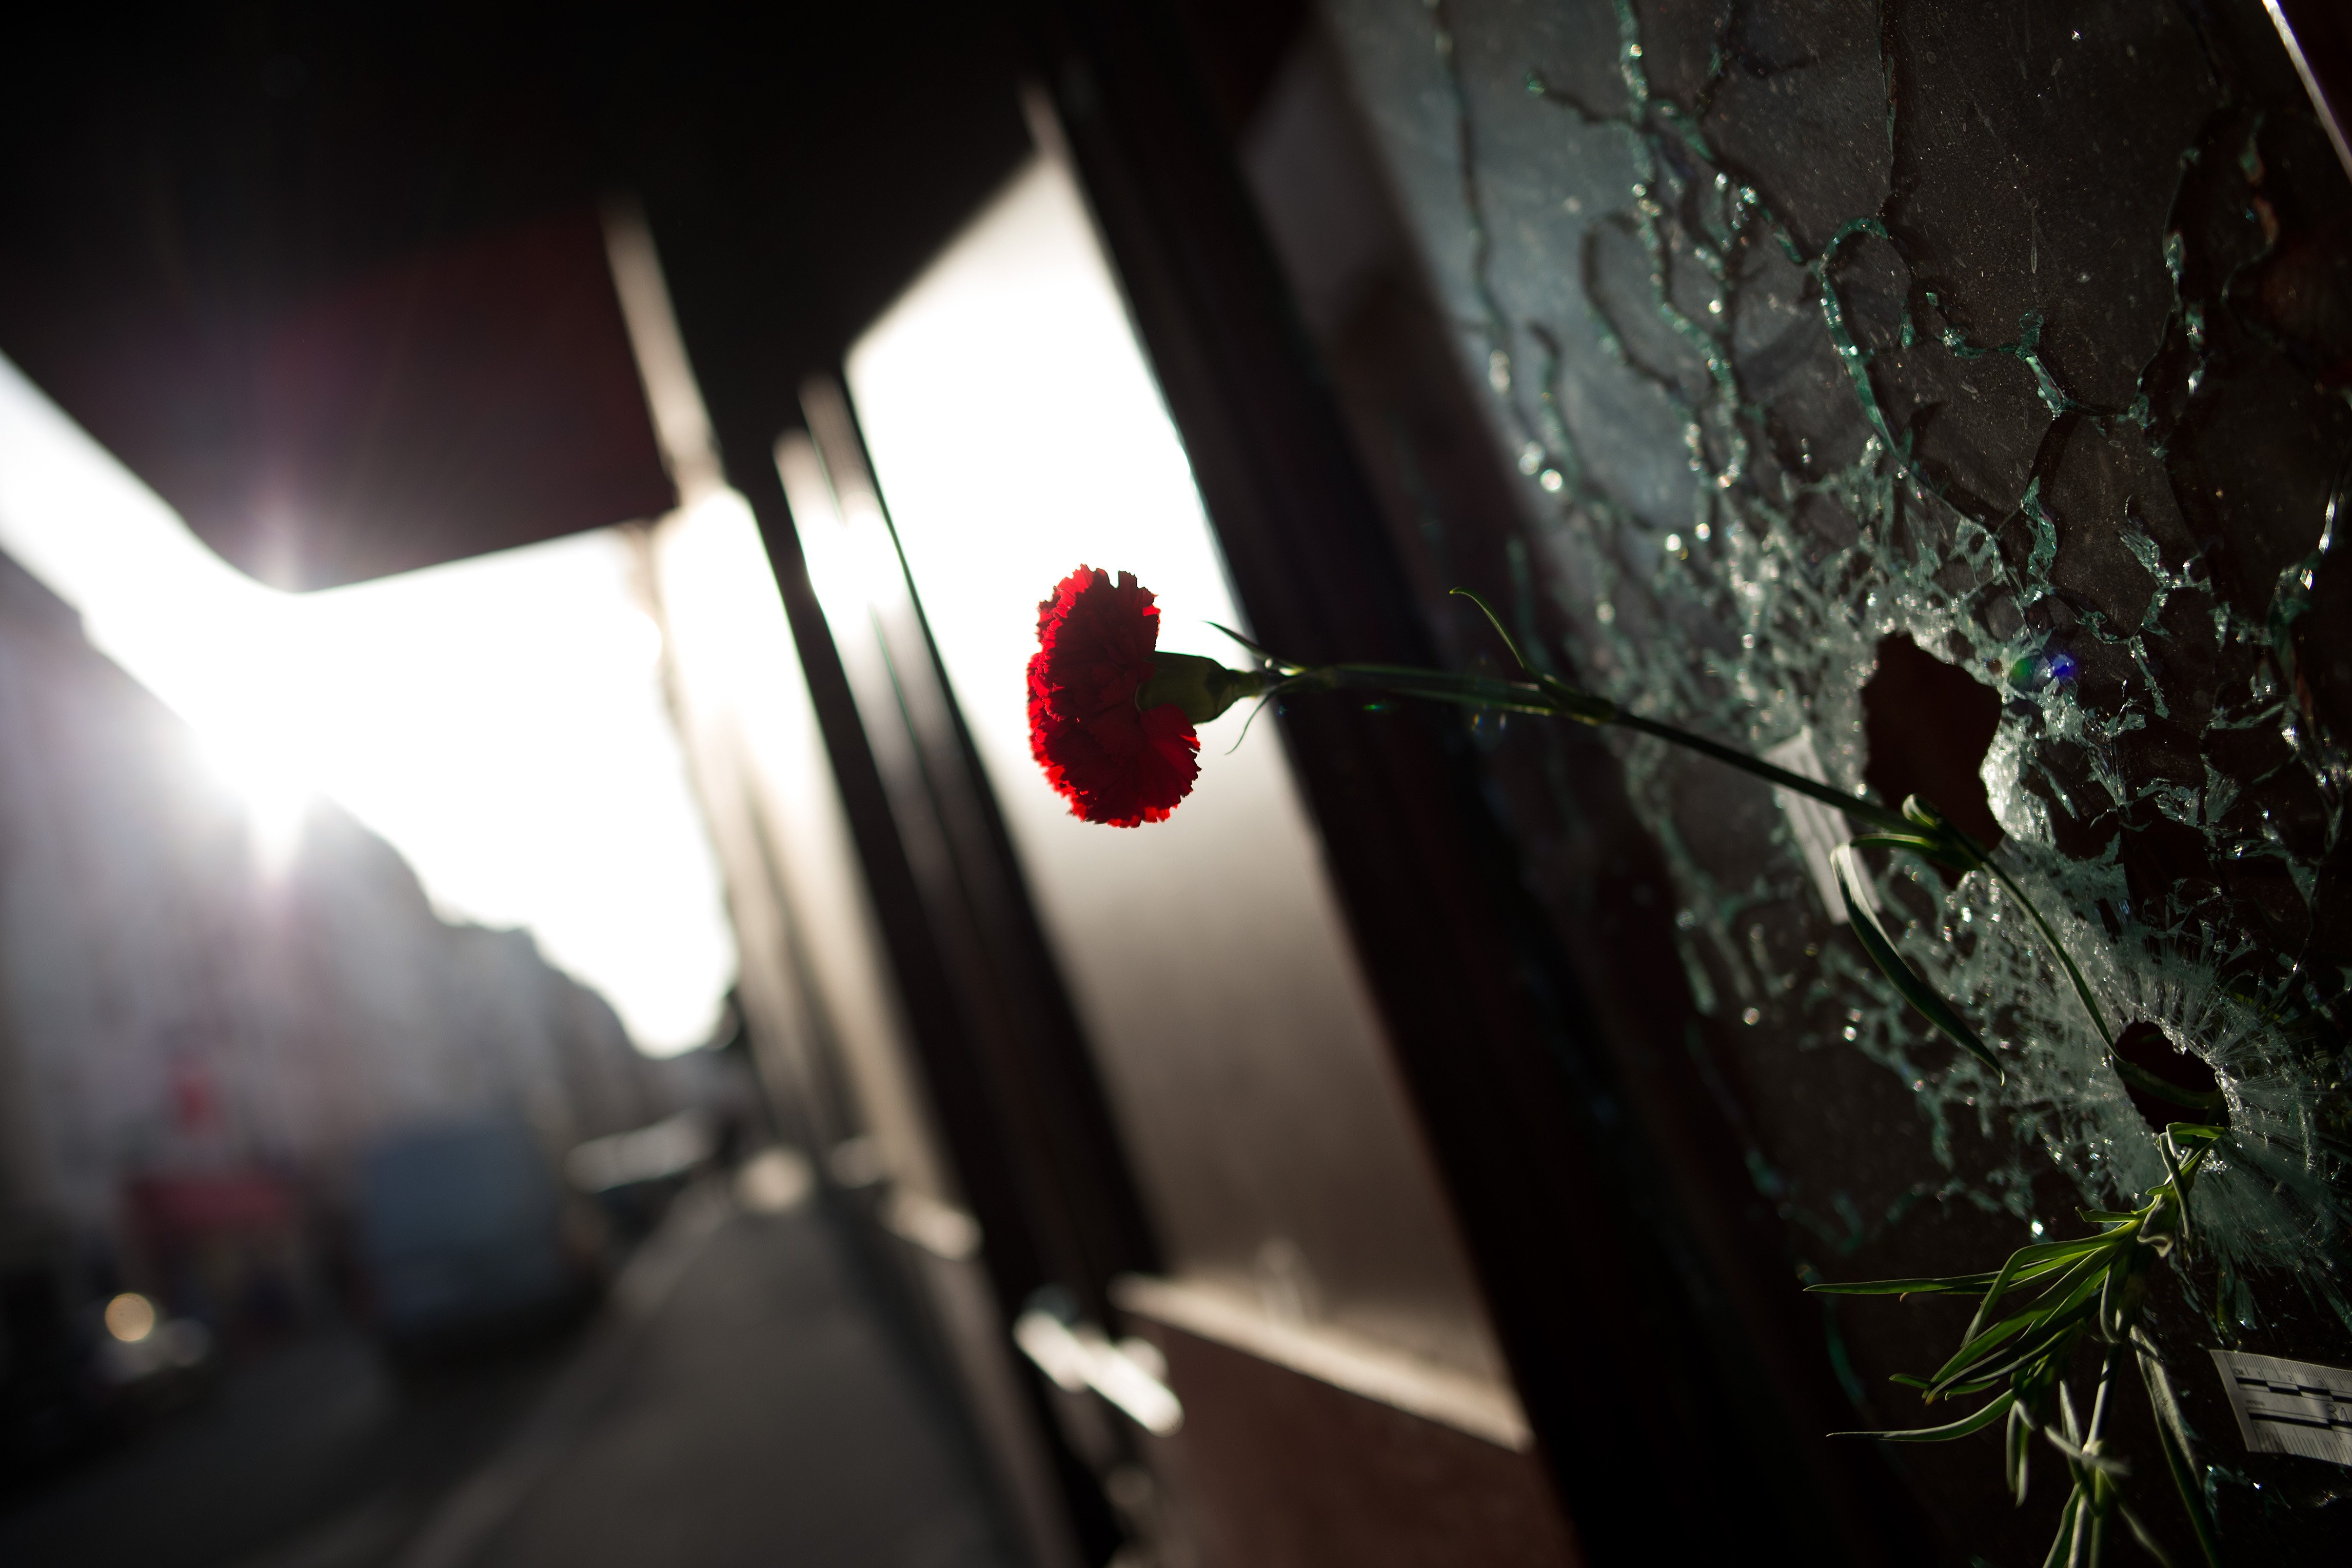 A flower is stuck in a bullet hole in the outside wall of the Café Carillon in the Rue Alibert in Paris on Nov. 15, 2015. (Marius Becker—dpa/Corbis)